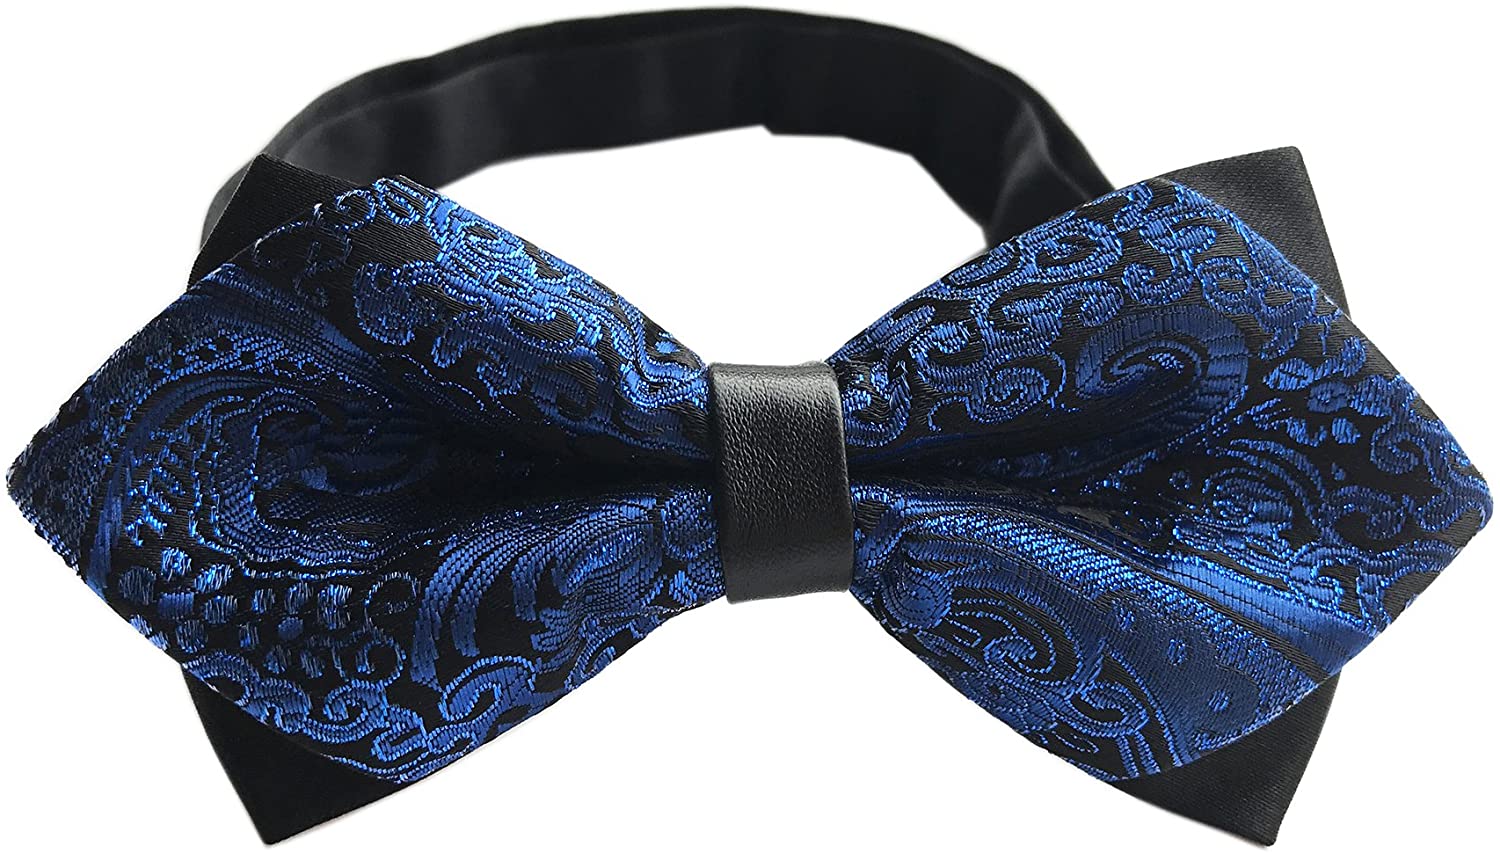 Mens Boys Formal Bow Ties 6 Pack of Solid Color Adjustable Pre Tied Bowties Champagne